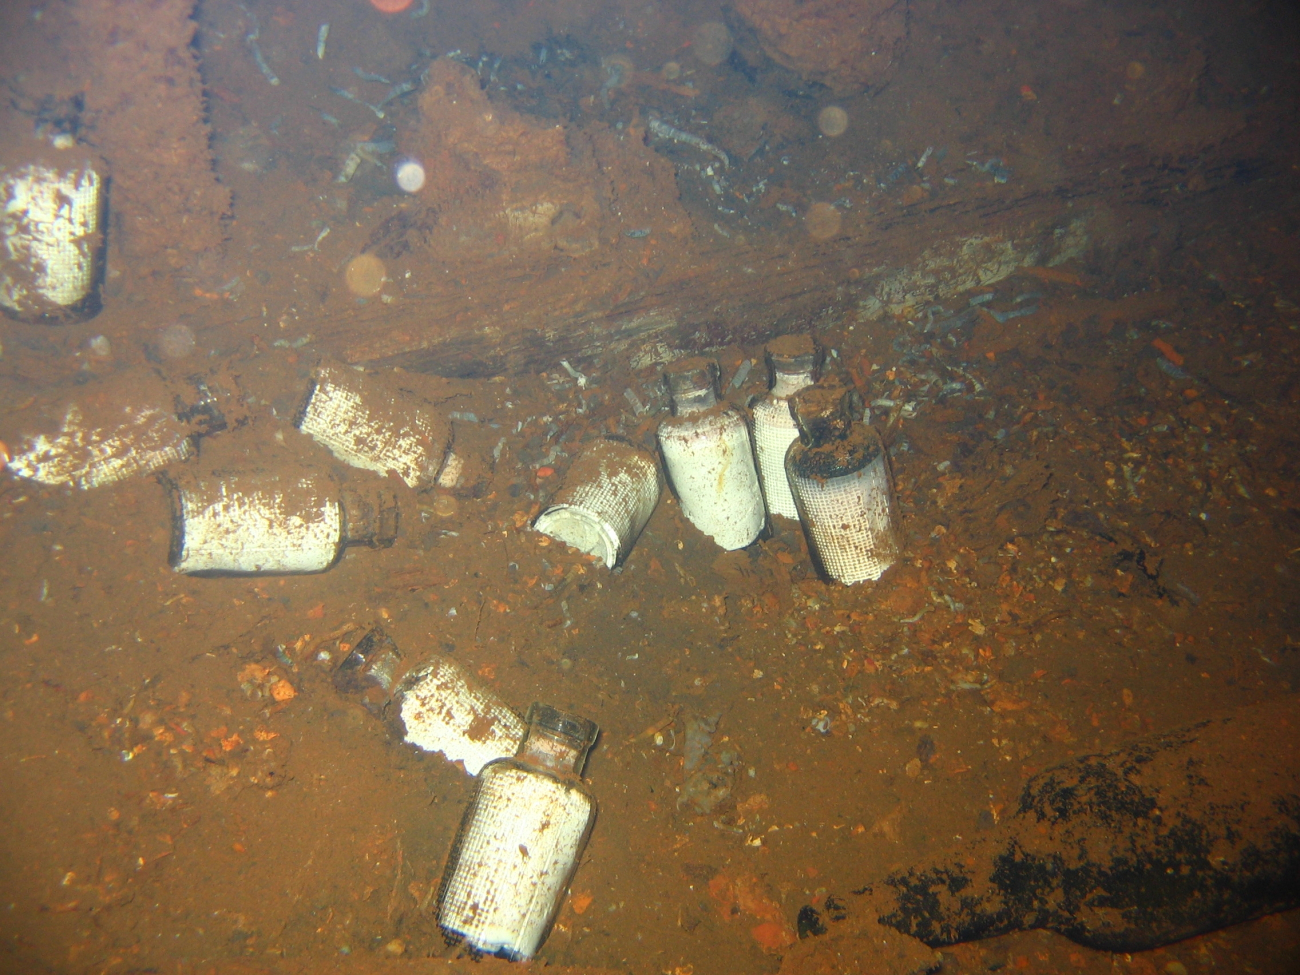 Medicine bottles strewn about the hold of the Fujikawa Maru